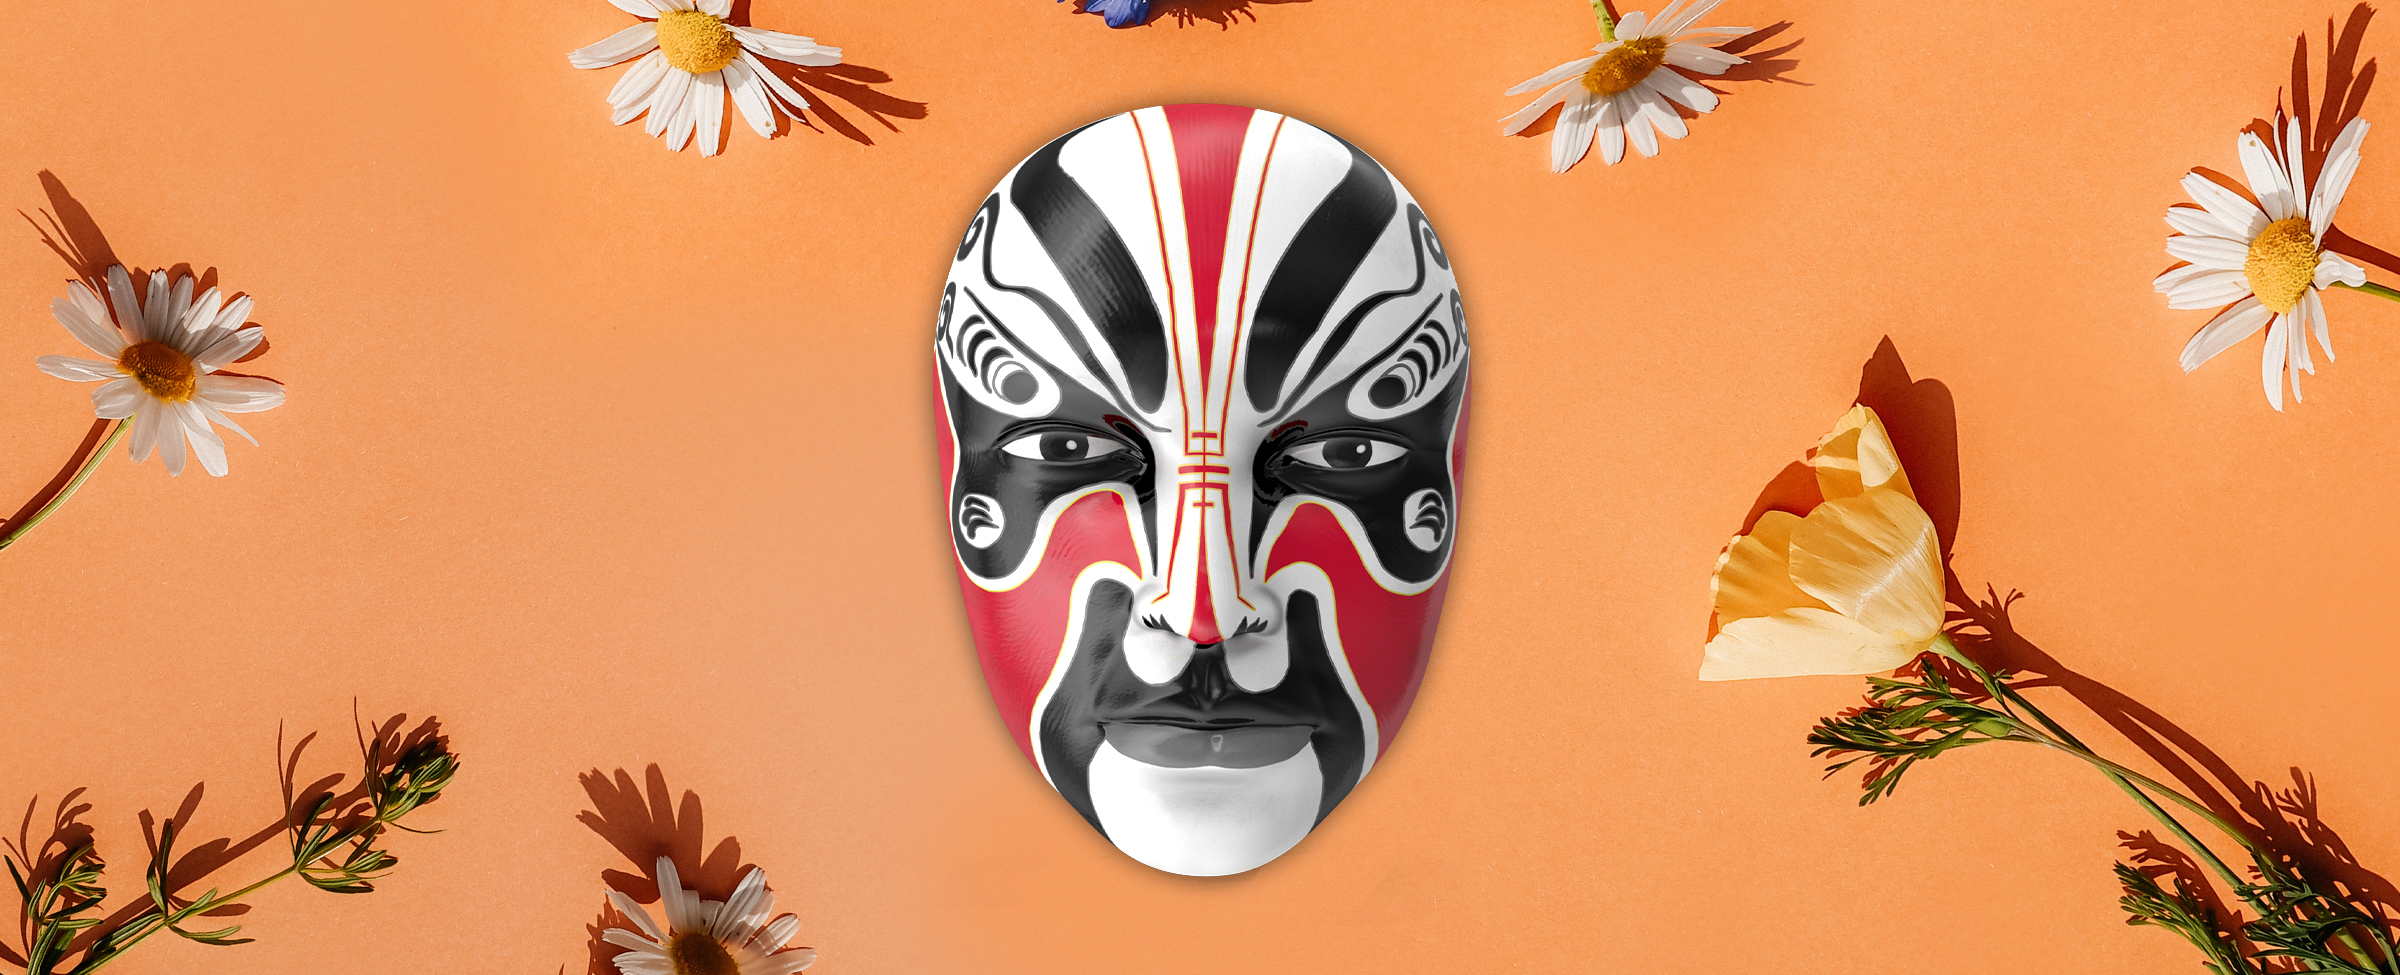 A red, black, and white mask is seen, from the Cafe Casino online slot Opera of the Mask, surrounded by various flowers which are resting on top of an apricot-colored table surface.